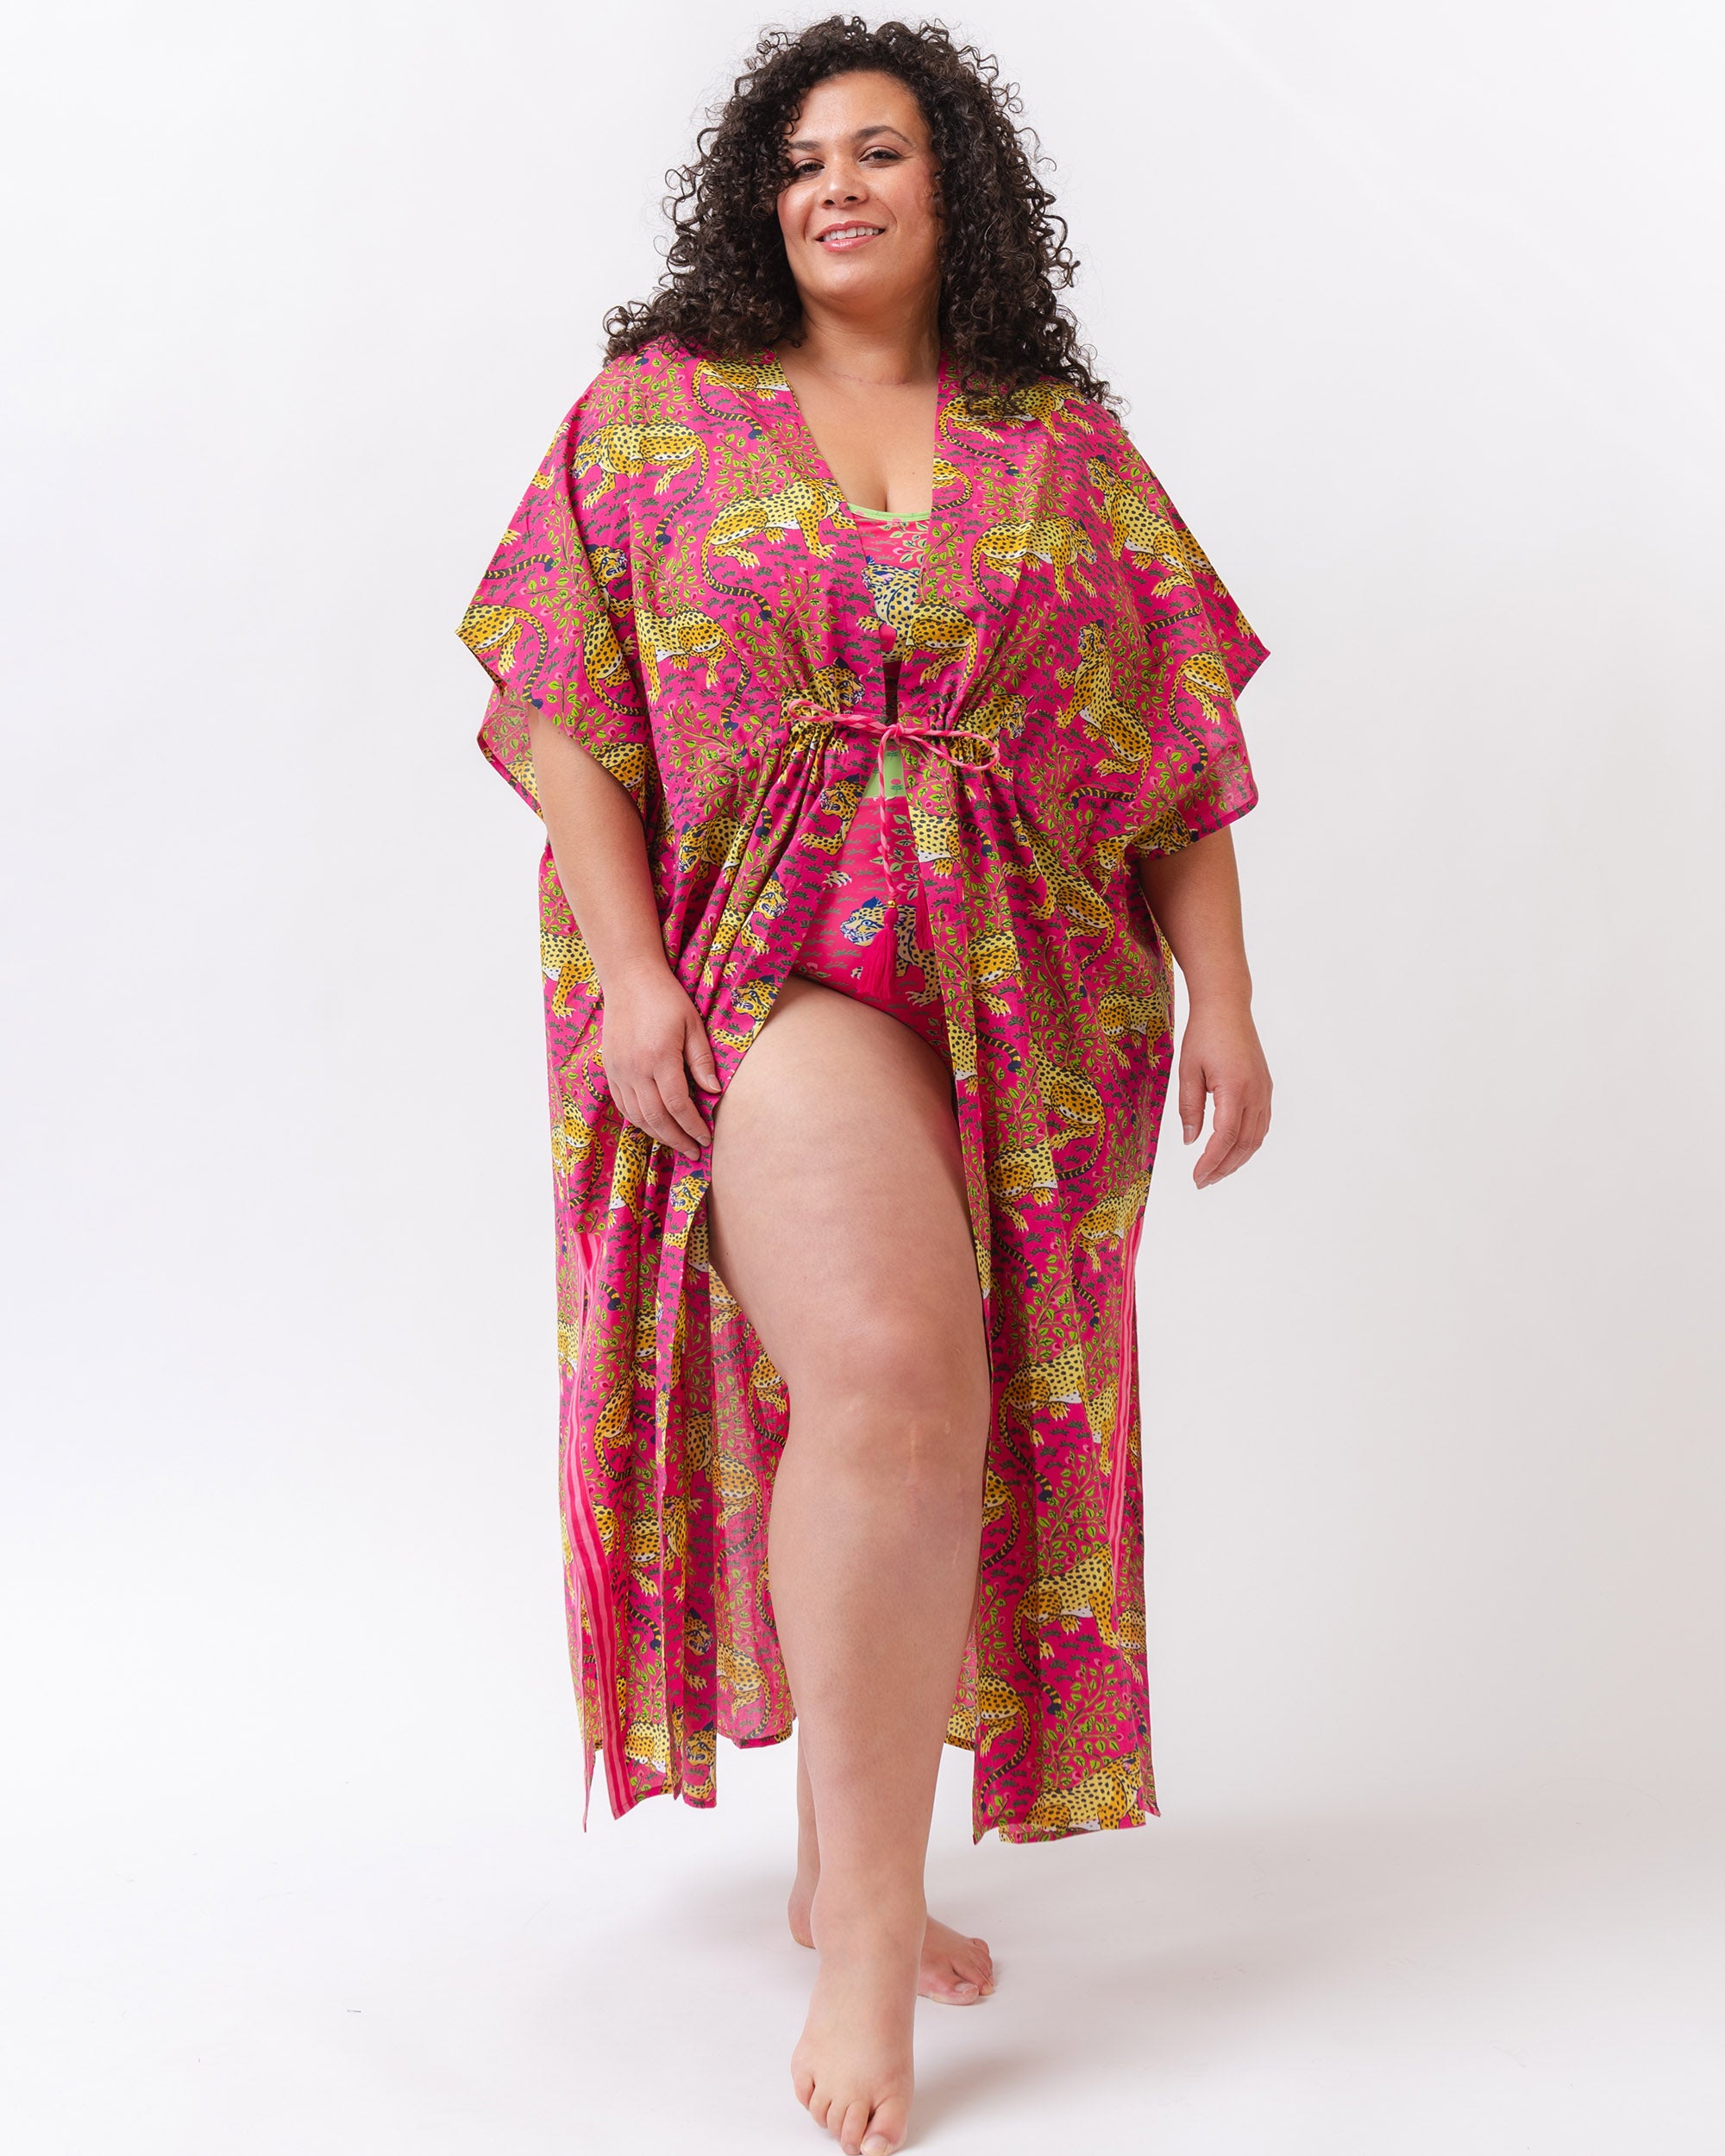 PF + Lime Ricki Bagheera - Daylight Open Front Cover-Up - Hot Pink - Printfresh